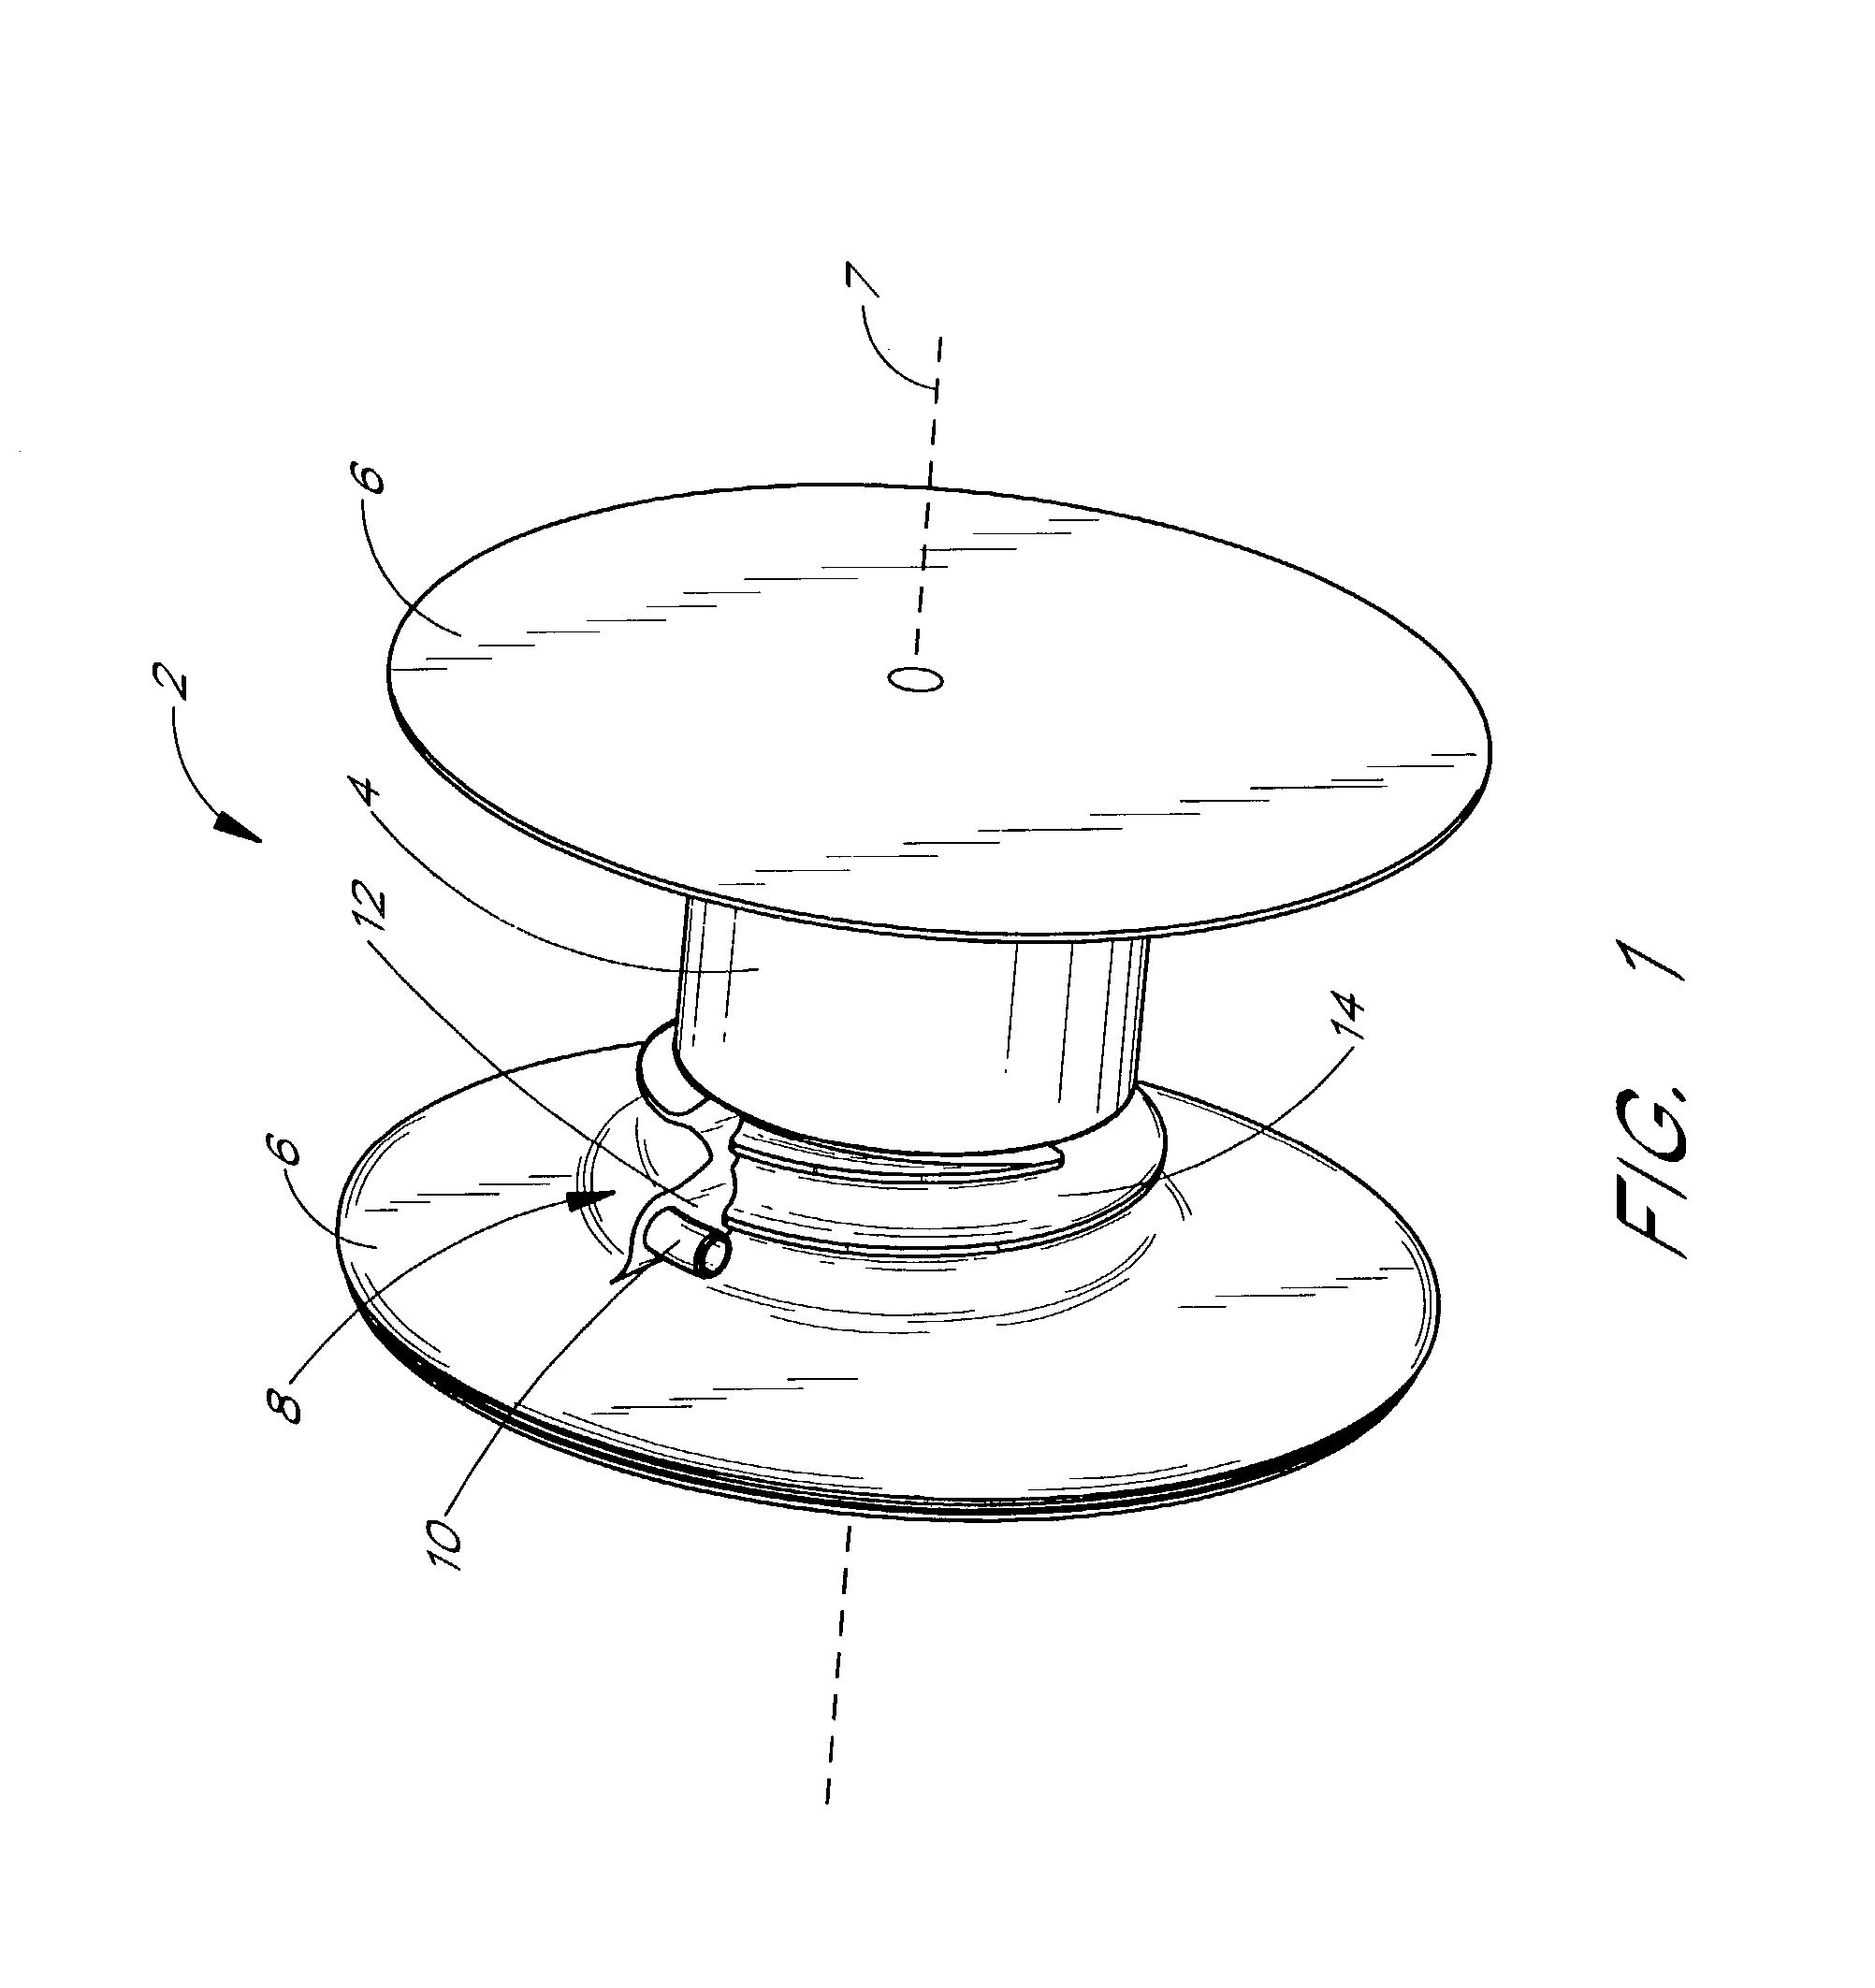 Reel having apparatus for improved connection of linear material